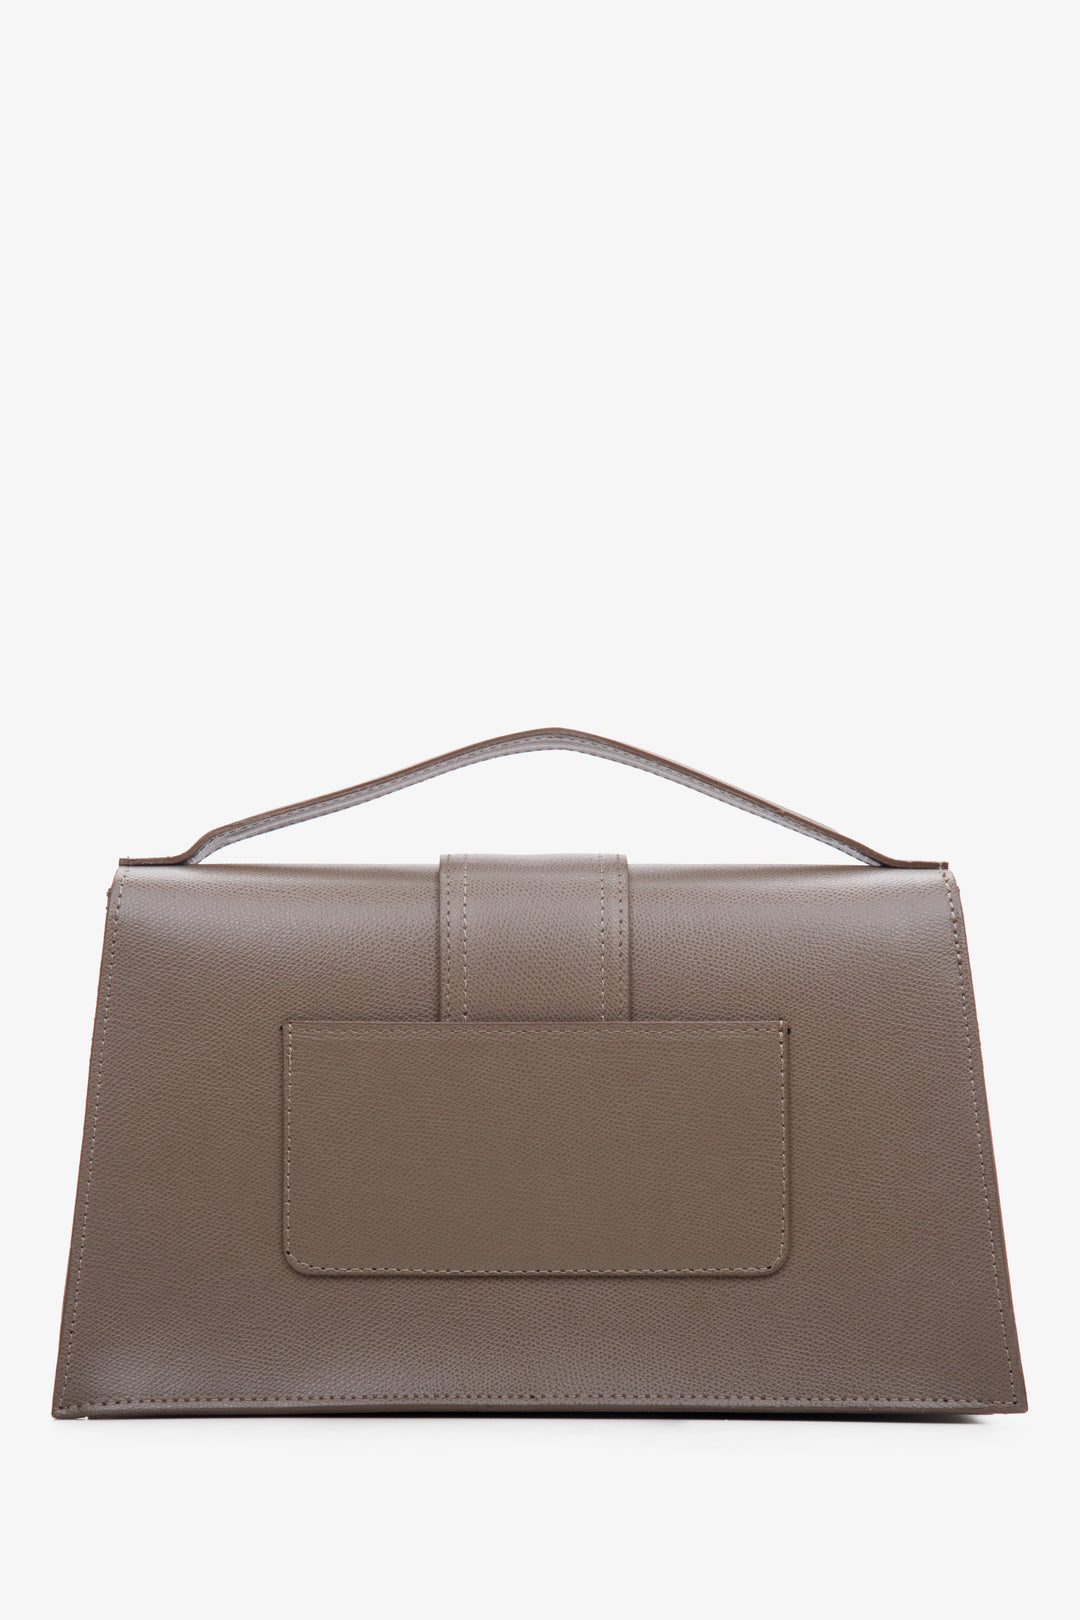 Women's brown leather handbag with a flap by Estro - back view.